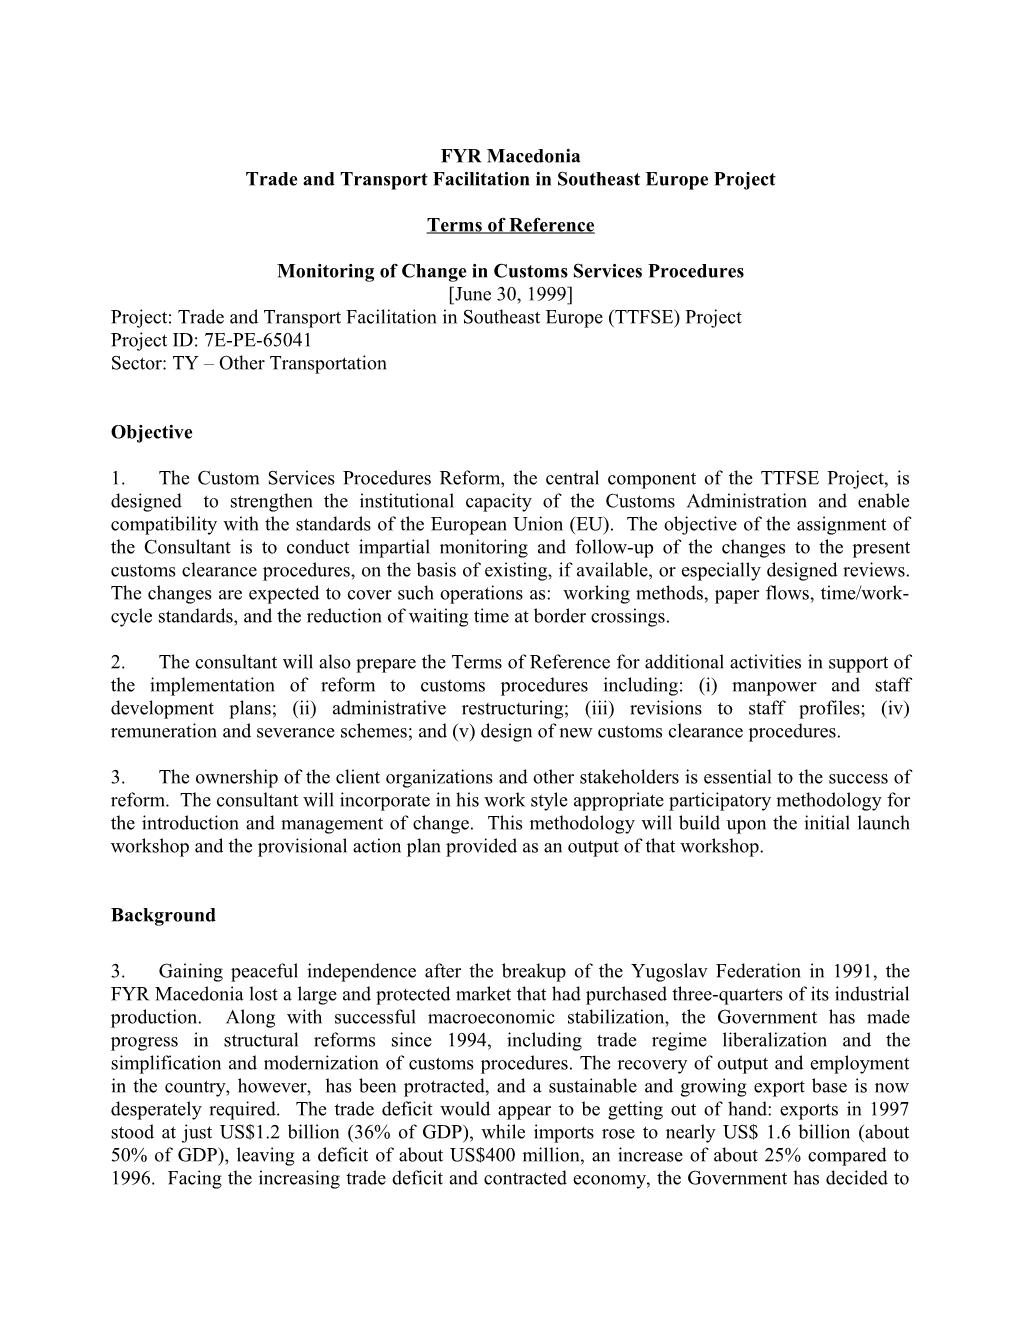 Trade and Transport Facilitation in Southeast Europe Project